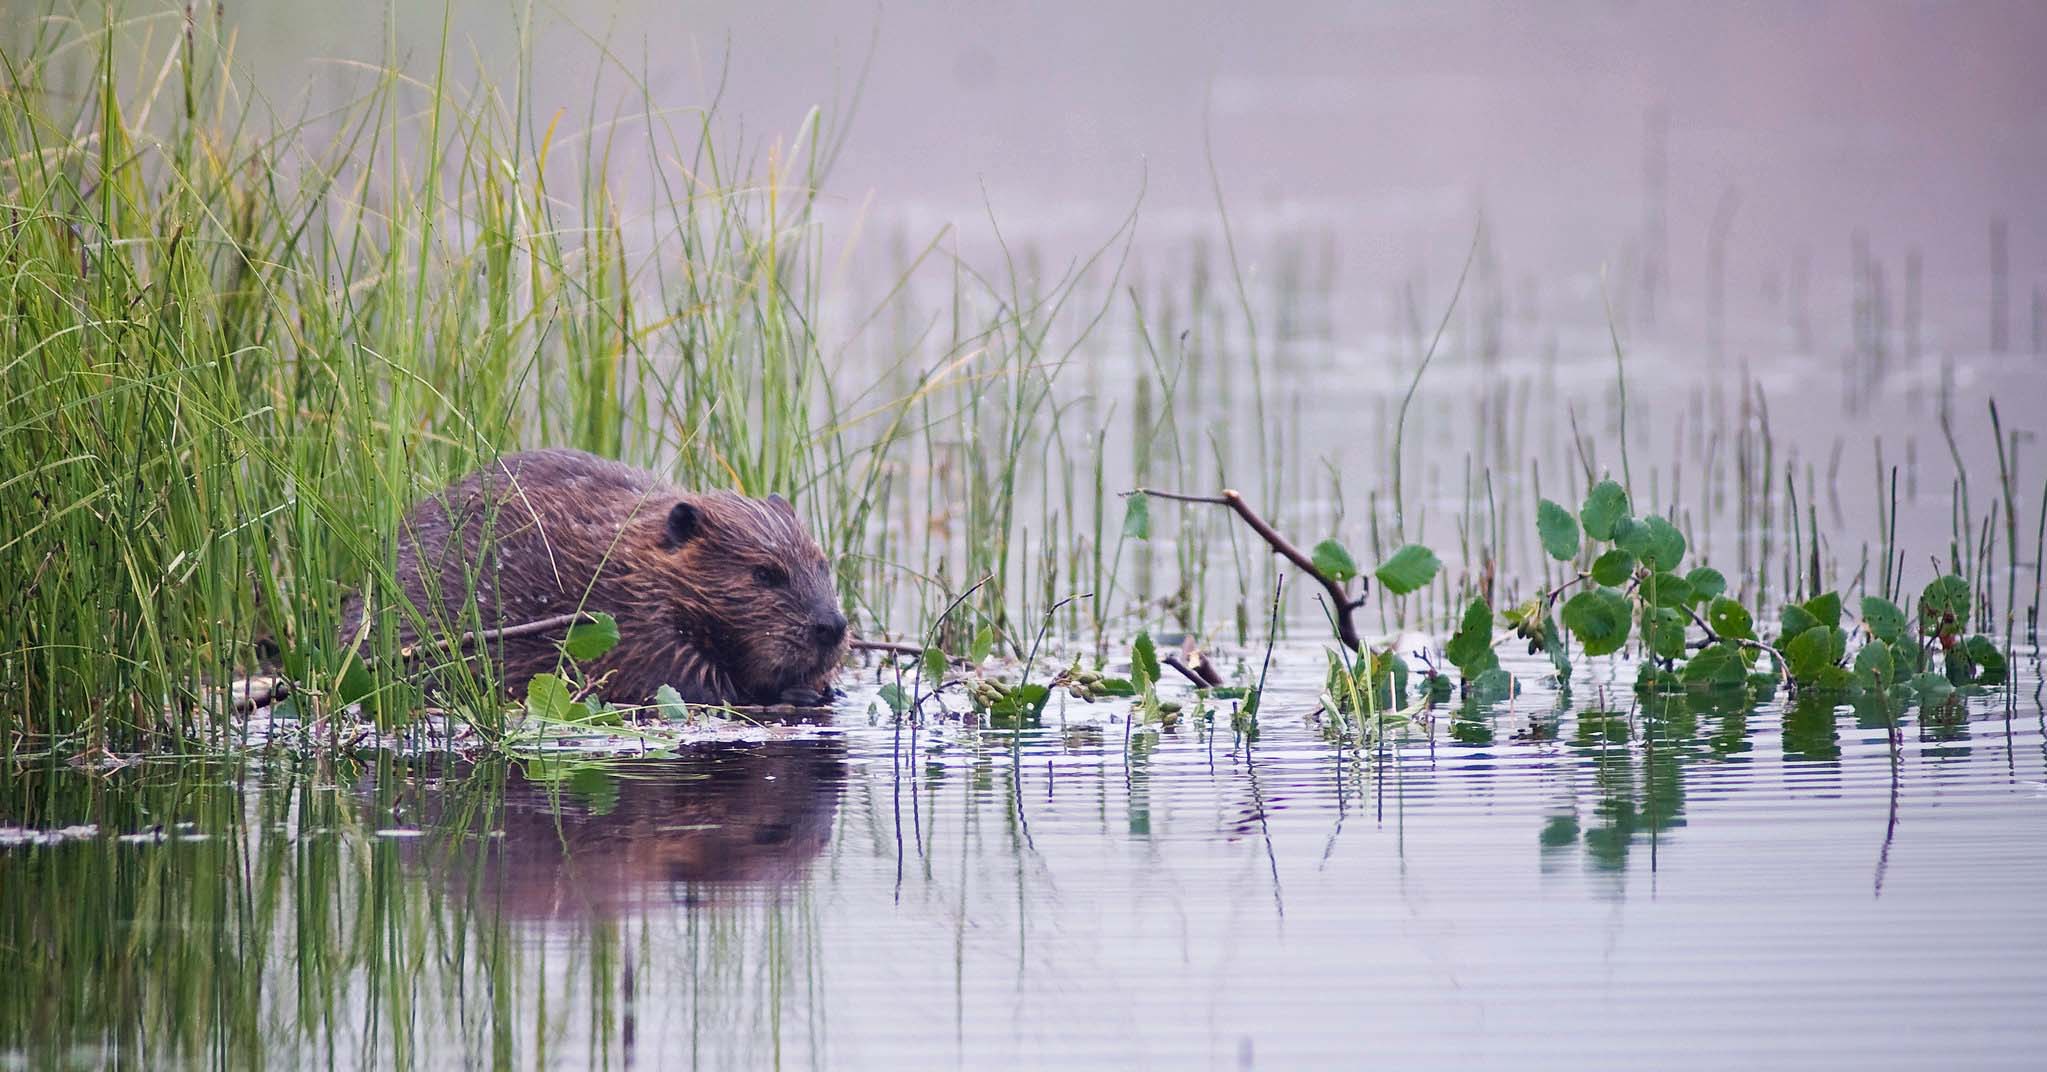 A beaver amongst grass in a pond, holding and nibbling at something